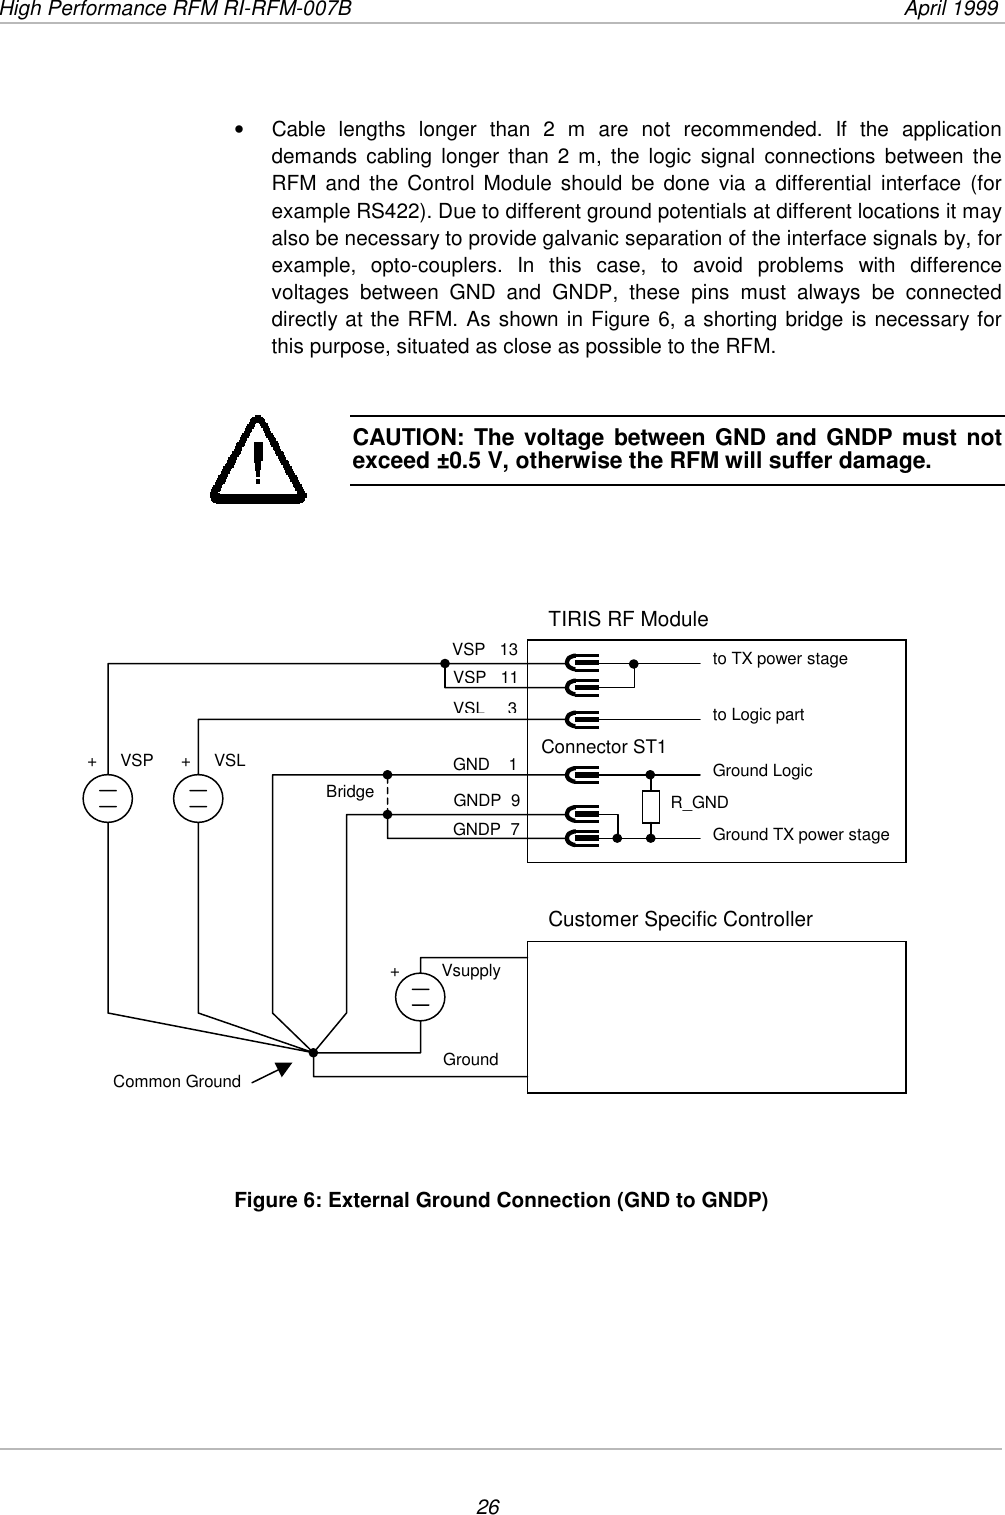 High Performance RFM RI-RFM-007B  April 199926•  Cable lengths longer than 2 m are not recommended. If the applicationdemands cabling longer than 2 m, the logic signal connections between theRFM and the Control Module should be done via a differential interface (forexample RS422). Due to different ground potentials at different locations it mayalso be necessary to provide galvanic separation of the interface signals by, forexample, opto-couplers. In this case, to avoid problems with differencevoltages between GND and GNDP, these pins must always be connecteddirectly at the RFM. As shown in Figure 6, a shorting bridge is necessary forthis purpose, situated as close as possible to the RFM.CAUTION: The voltage between GND and GNDP must notexceed ±0.5 V, otherwise the RFM will suffer damage.Figure 6: External Ground Connection (GND to GNDP)TIRIS RF ModuleCustomer Specific Controller+         VsupplyGroundCommon GroundVSP   13VSP 11VSL 3GND    1GNDP  9GNDP  7Bridge+     VSL+     VSP Connector ST1to TX power stageto Logic partGround LogicGround TX power stageR_GND